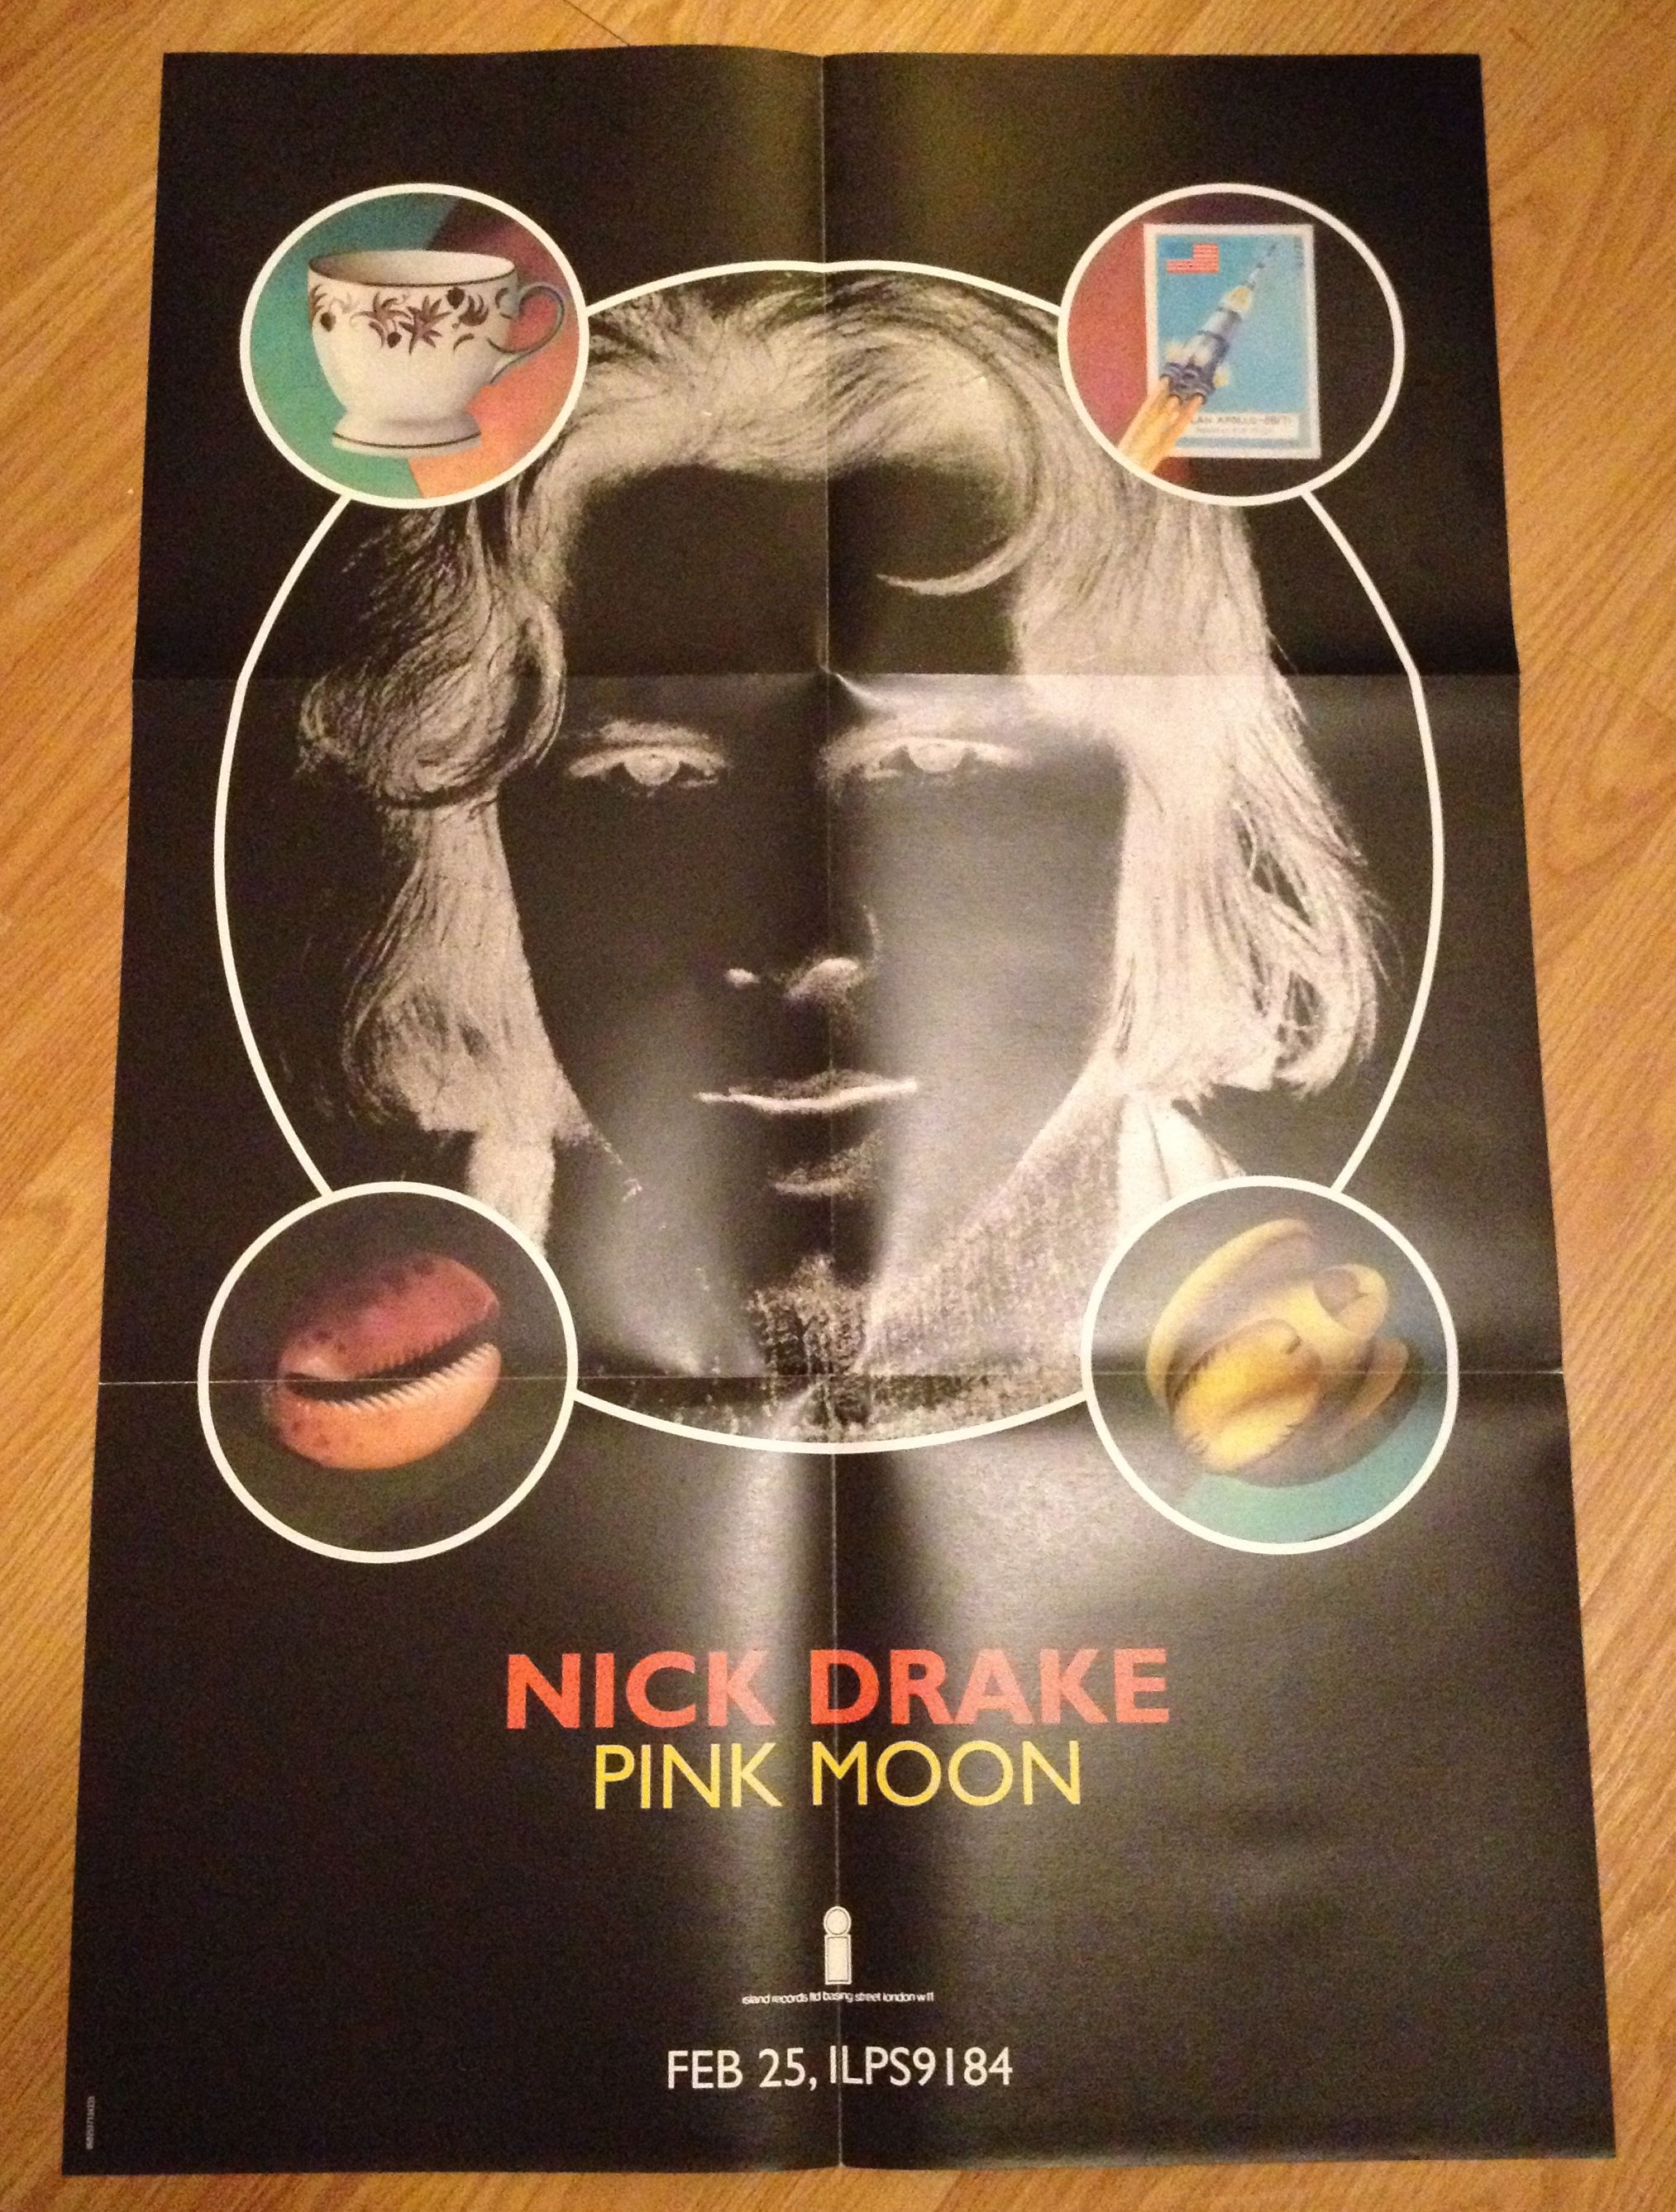 Nick Drake – Pink Moon (Deluxe Re-issue) | Analogue Adventures